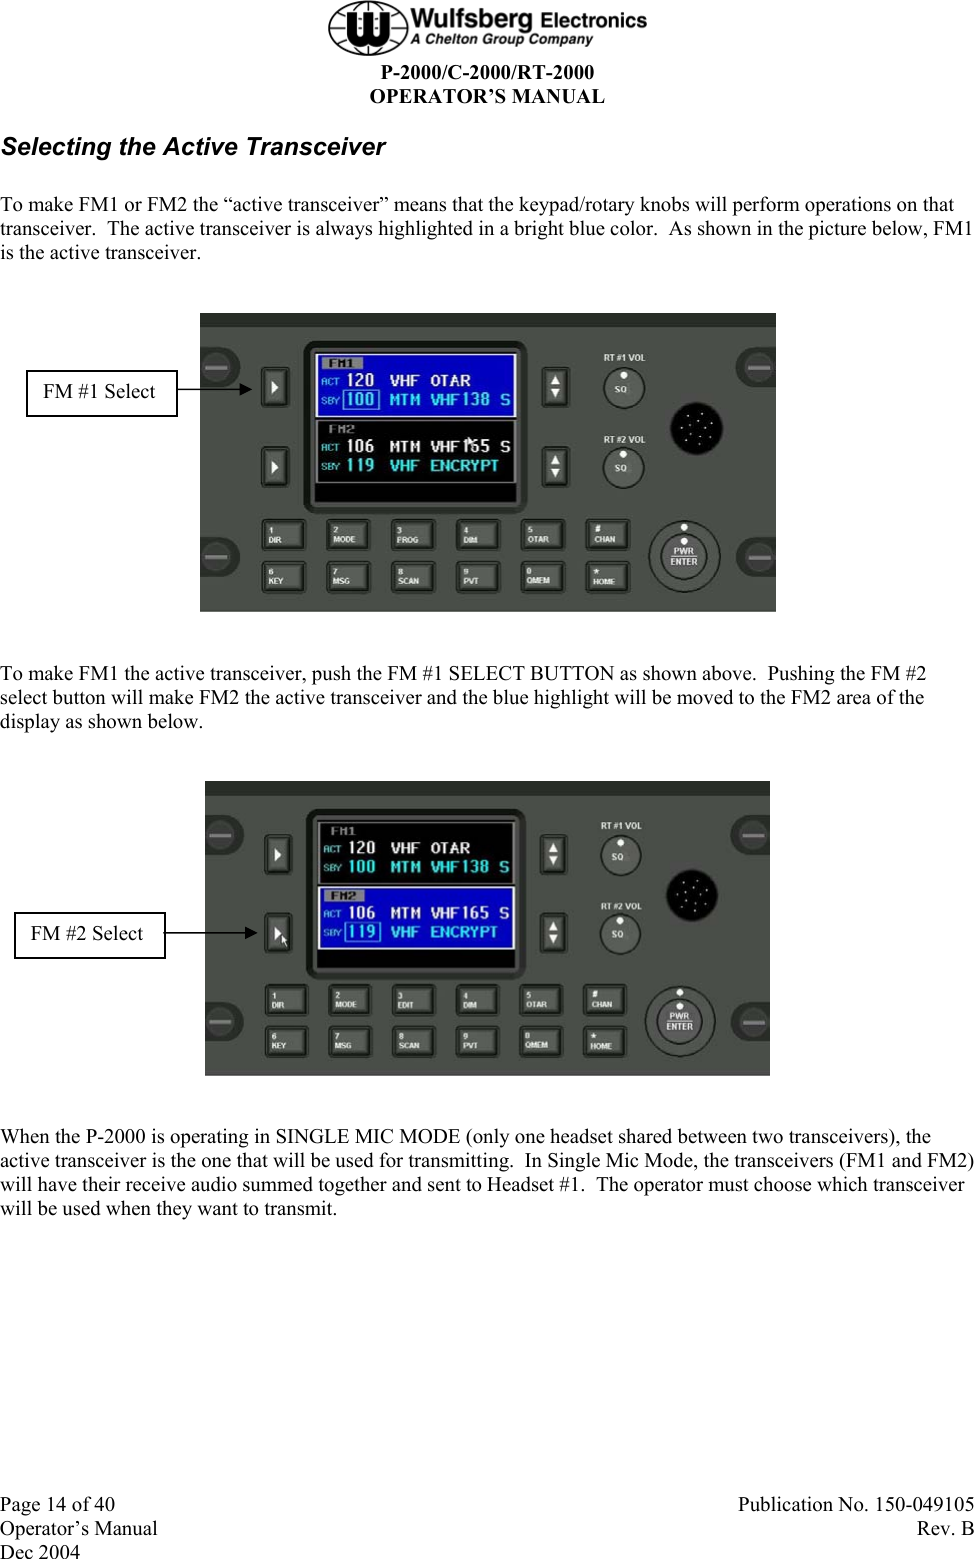  P-2000/C-2000/RT-2000 OPERATOR’S MANUAL  Page 14 of 40  Publication No. 150-049105 Operator’s Manual   Rev. B Dec 2004 Selecting the Active Transceiver To make FM1 or FM2 the “active transceiver” means that the keypad/rotary knobs will perform operations on that transceiver.  The active transceiver is always highlighted in a bright blue color.  As shown in the picture below, FM1 is the active transceiver.    To make FM1 the active transceiver, push the FM #1 SELECT BUTTON as shown above.  Pushing the FM #2 select button will make FM2 the active transceiver and the blue highlight will be moved to the FM2 area of the display as shown below.    When the P-2000 is operating in SINGLE MIC MODE (only one headset shared between two transceivers), the active transceiver is the one that will be used for transmitting.  In Single Mic Mode, the transceivers (FM1 and FM2) will have their receive audio summed together and sent to Headset #1.  The operator must choose which transceiver will be used when they want to transmit. FM #2 Select FM #1 Select 